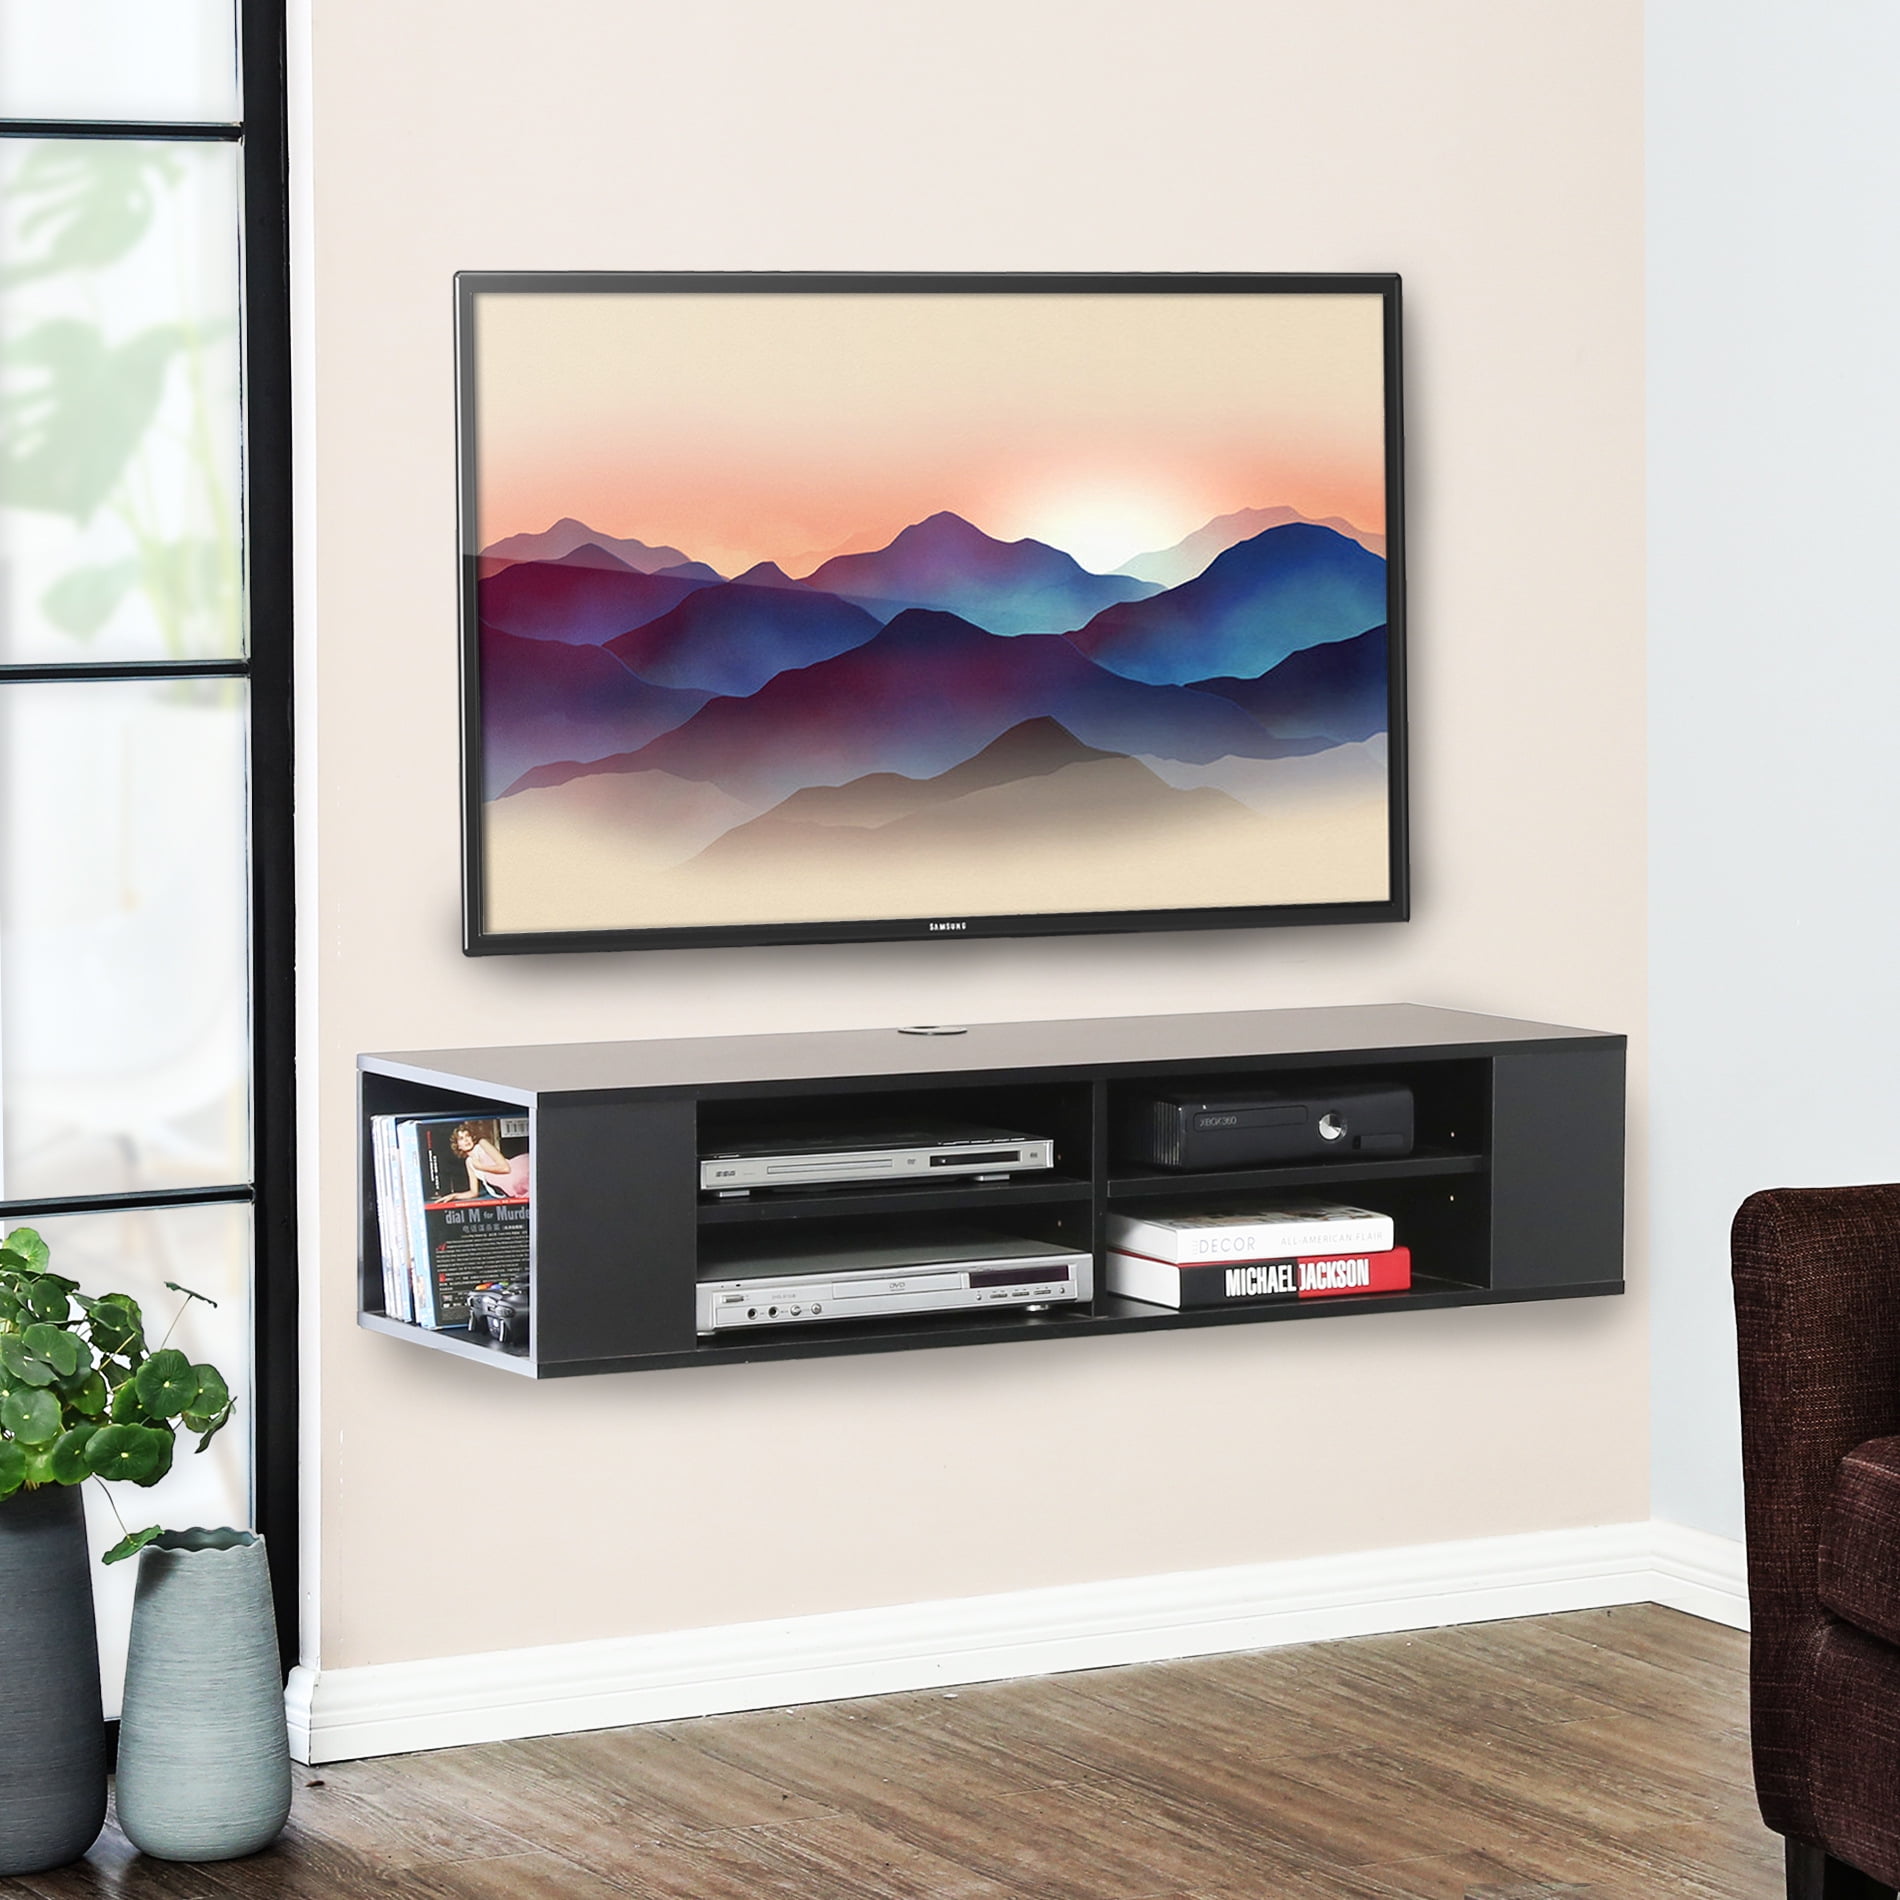 FITUEYES Black Wall Mounted Media Console Floating TV ...